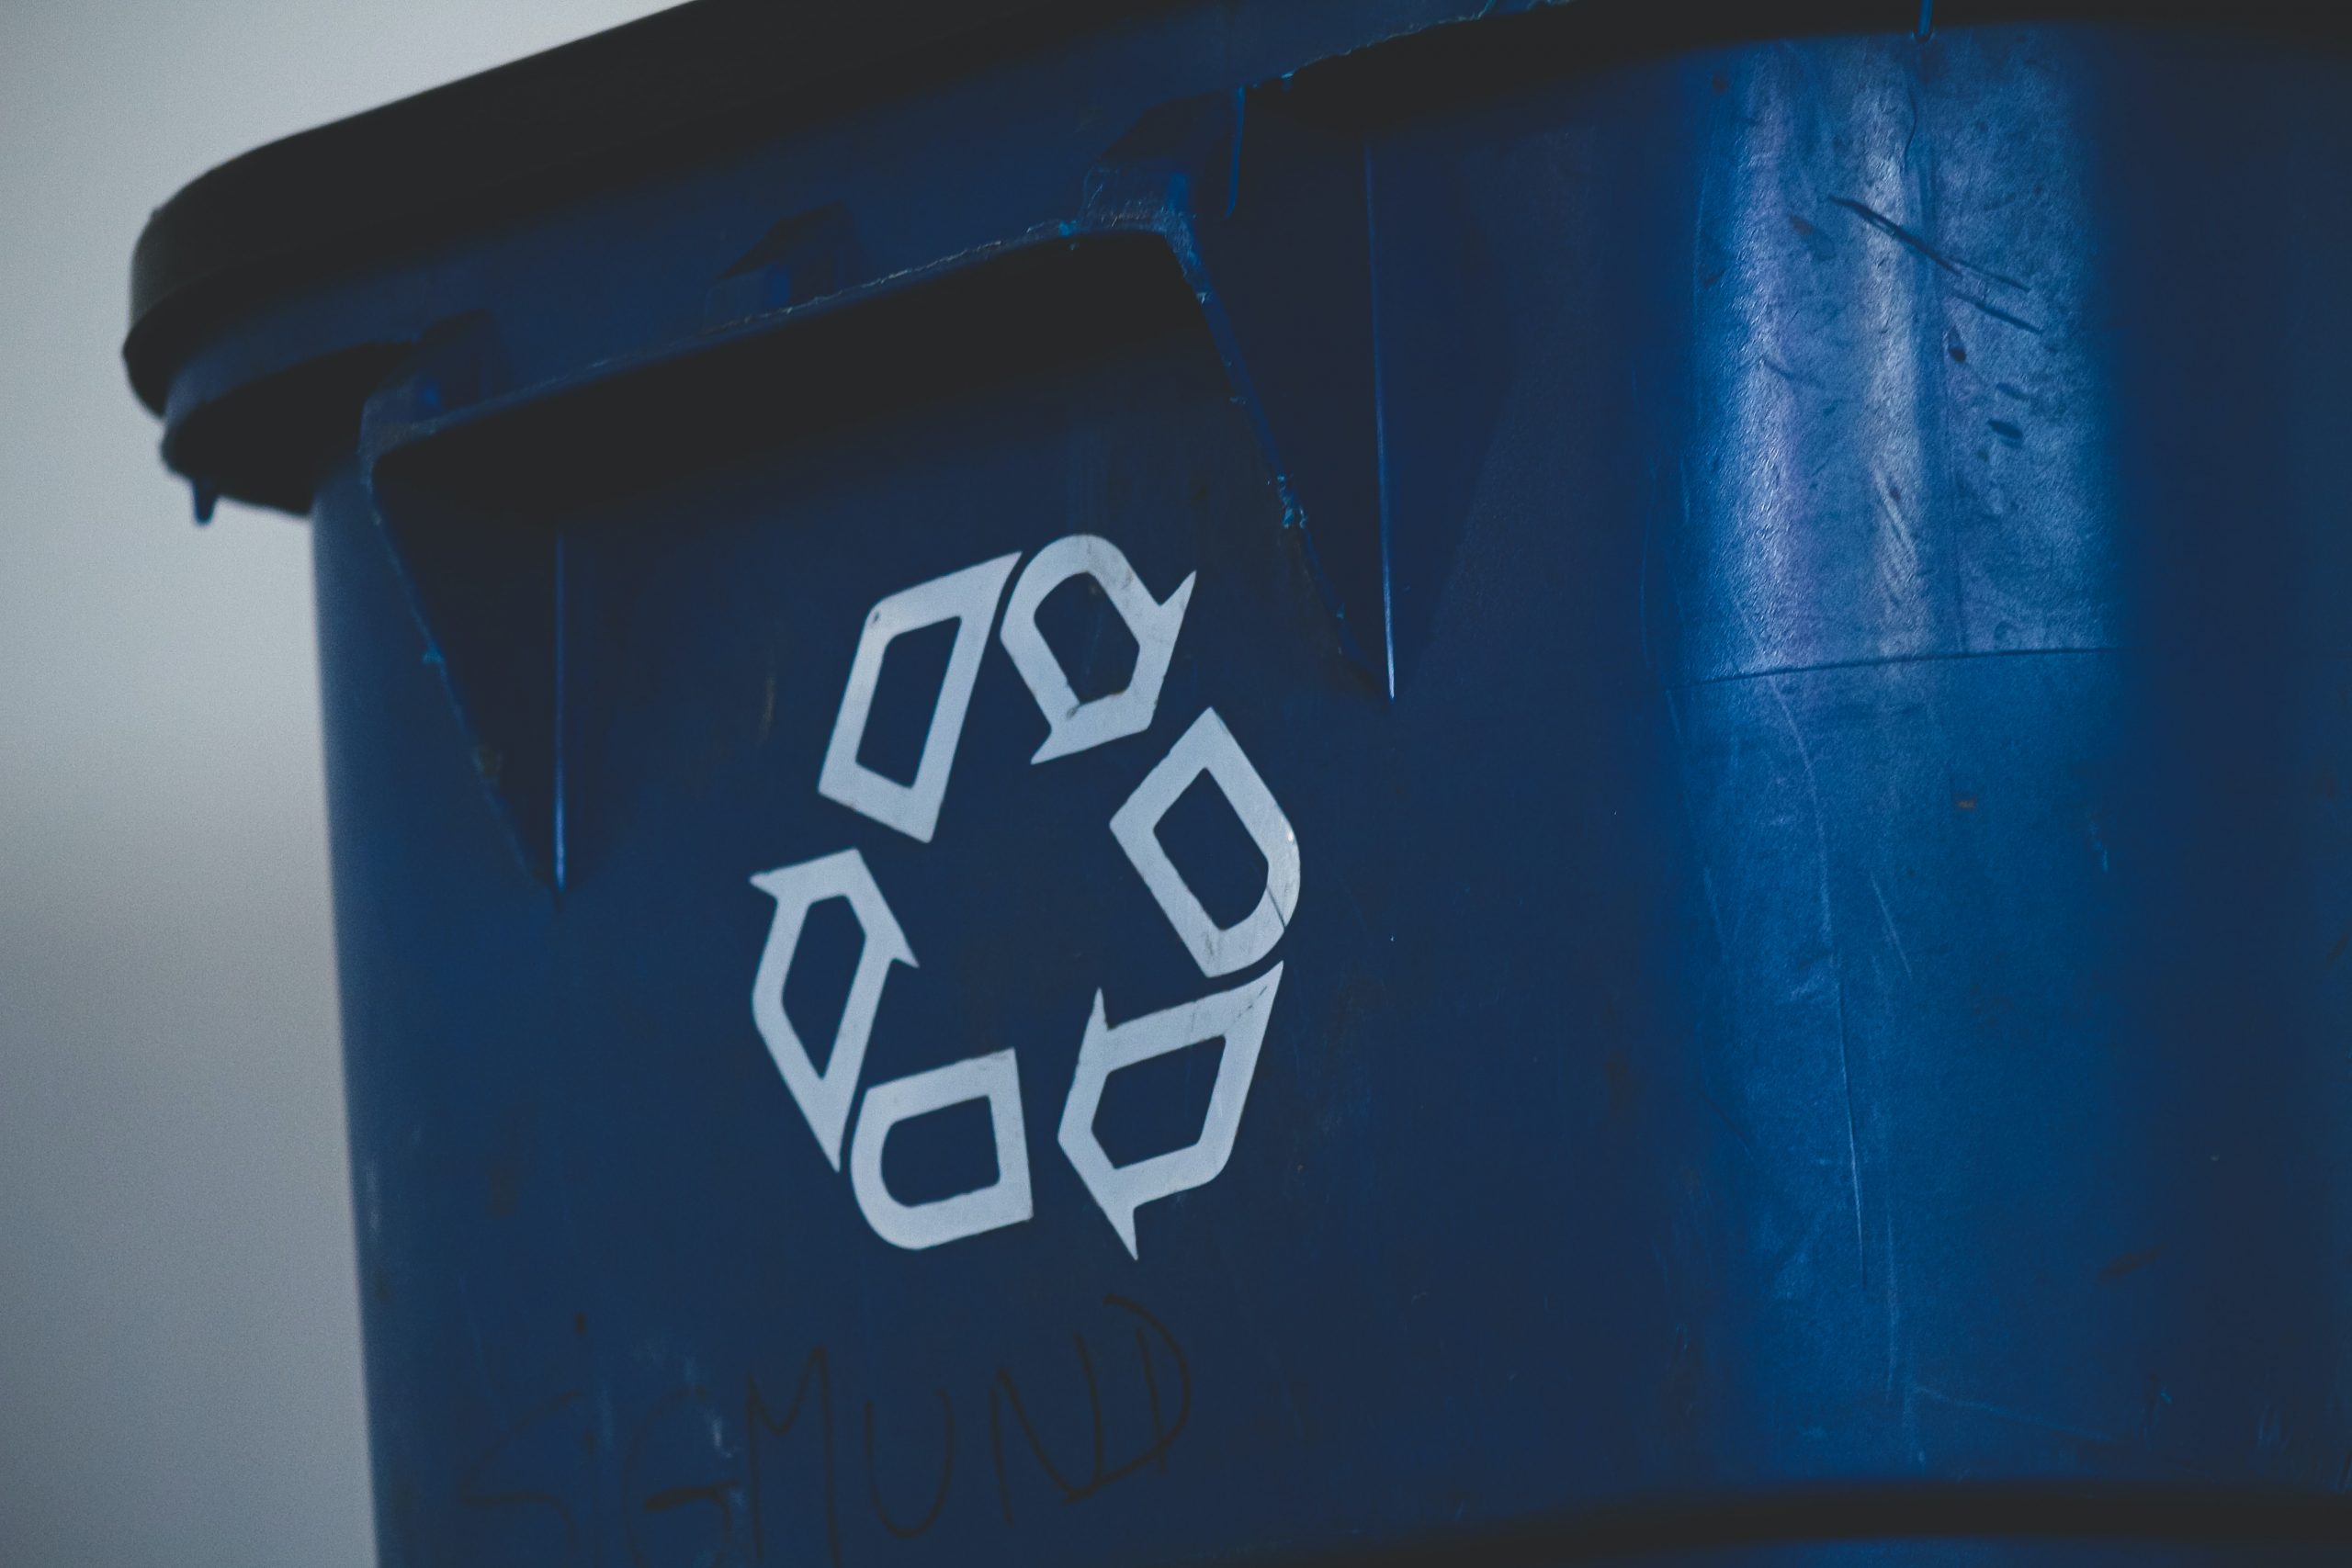 Image of a blue plastic bin (showing the recyclye logo) that is typically used for recycling used containers.